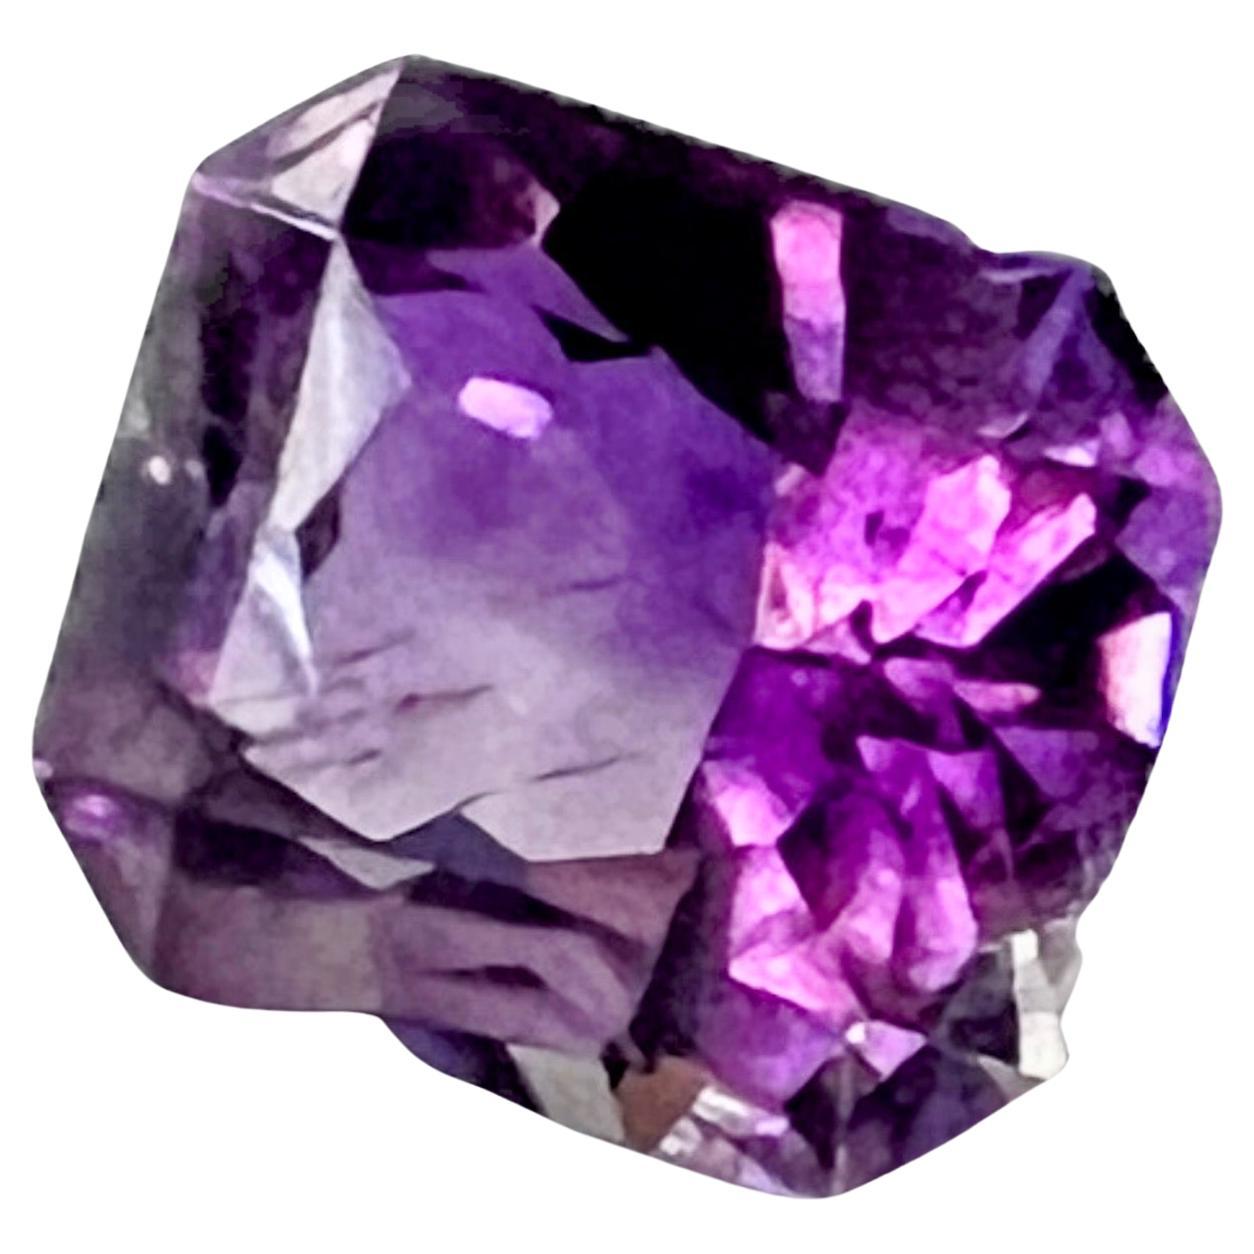 This Exquisite 7.17ct Princess Cut Natural Purple Amethyst Loose Gemstone is crafted to perfection.
The gemstone boasts a skillfully cut princess cut that adds a touch of perfection to your designs.
Gemstone Details:
Weight: 7.17 carats
Cut: